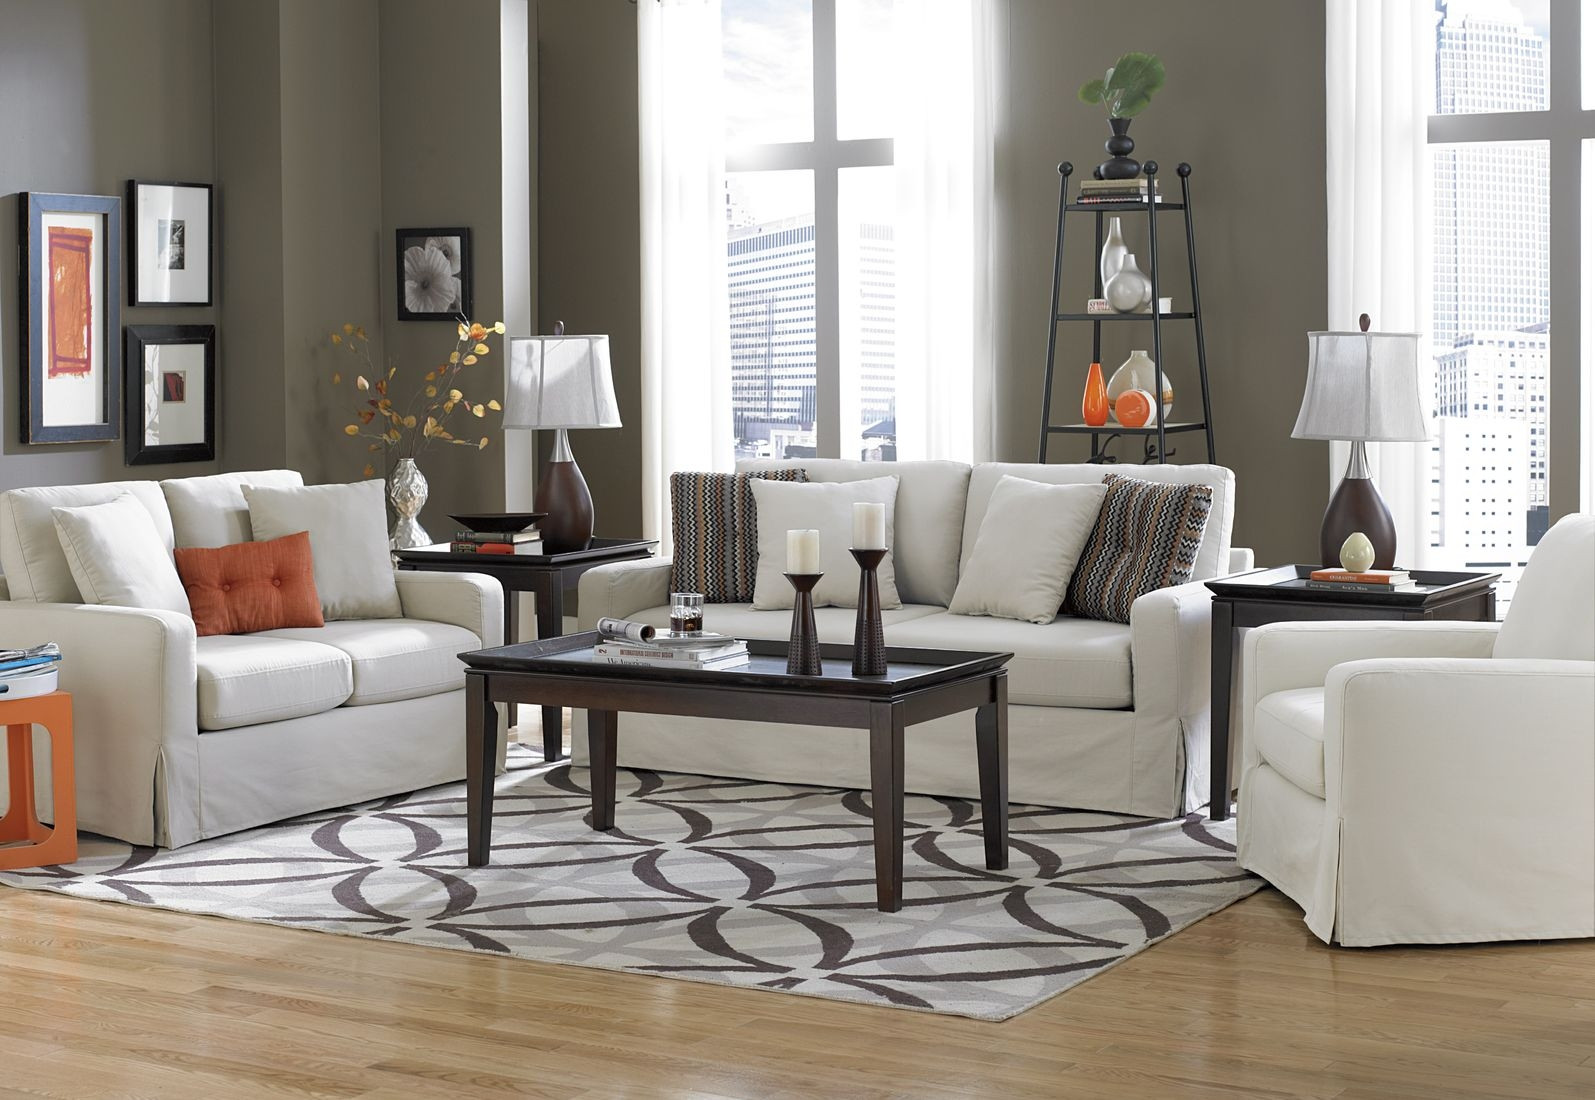 Decorative Rugs For Living Room
 15 Best Rugs in Living Rooms